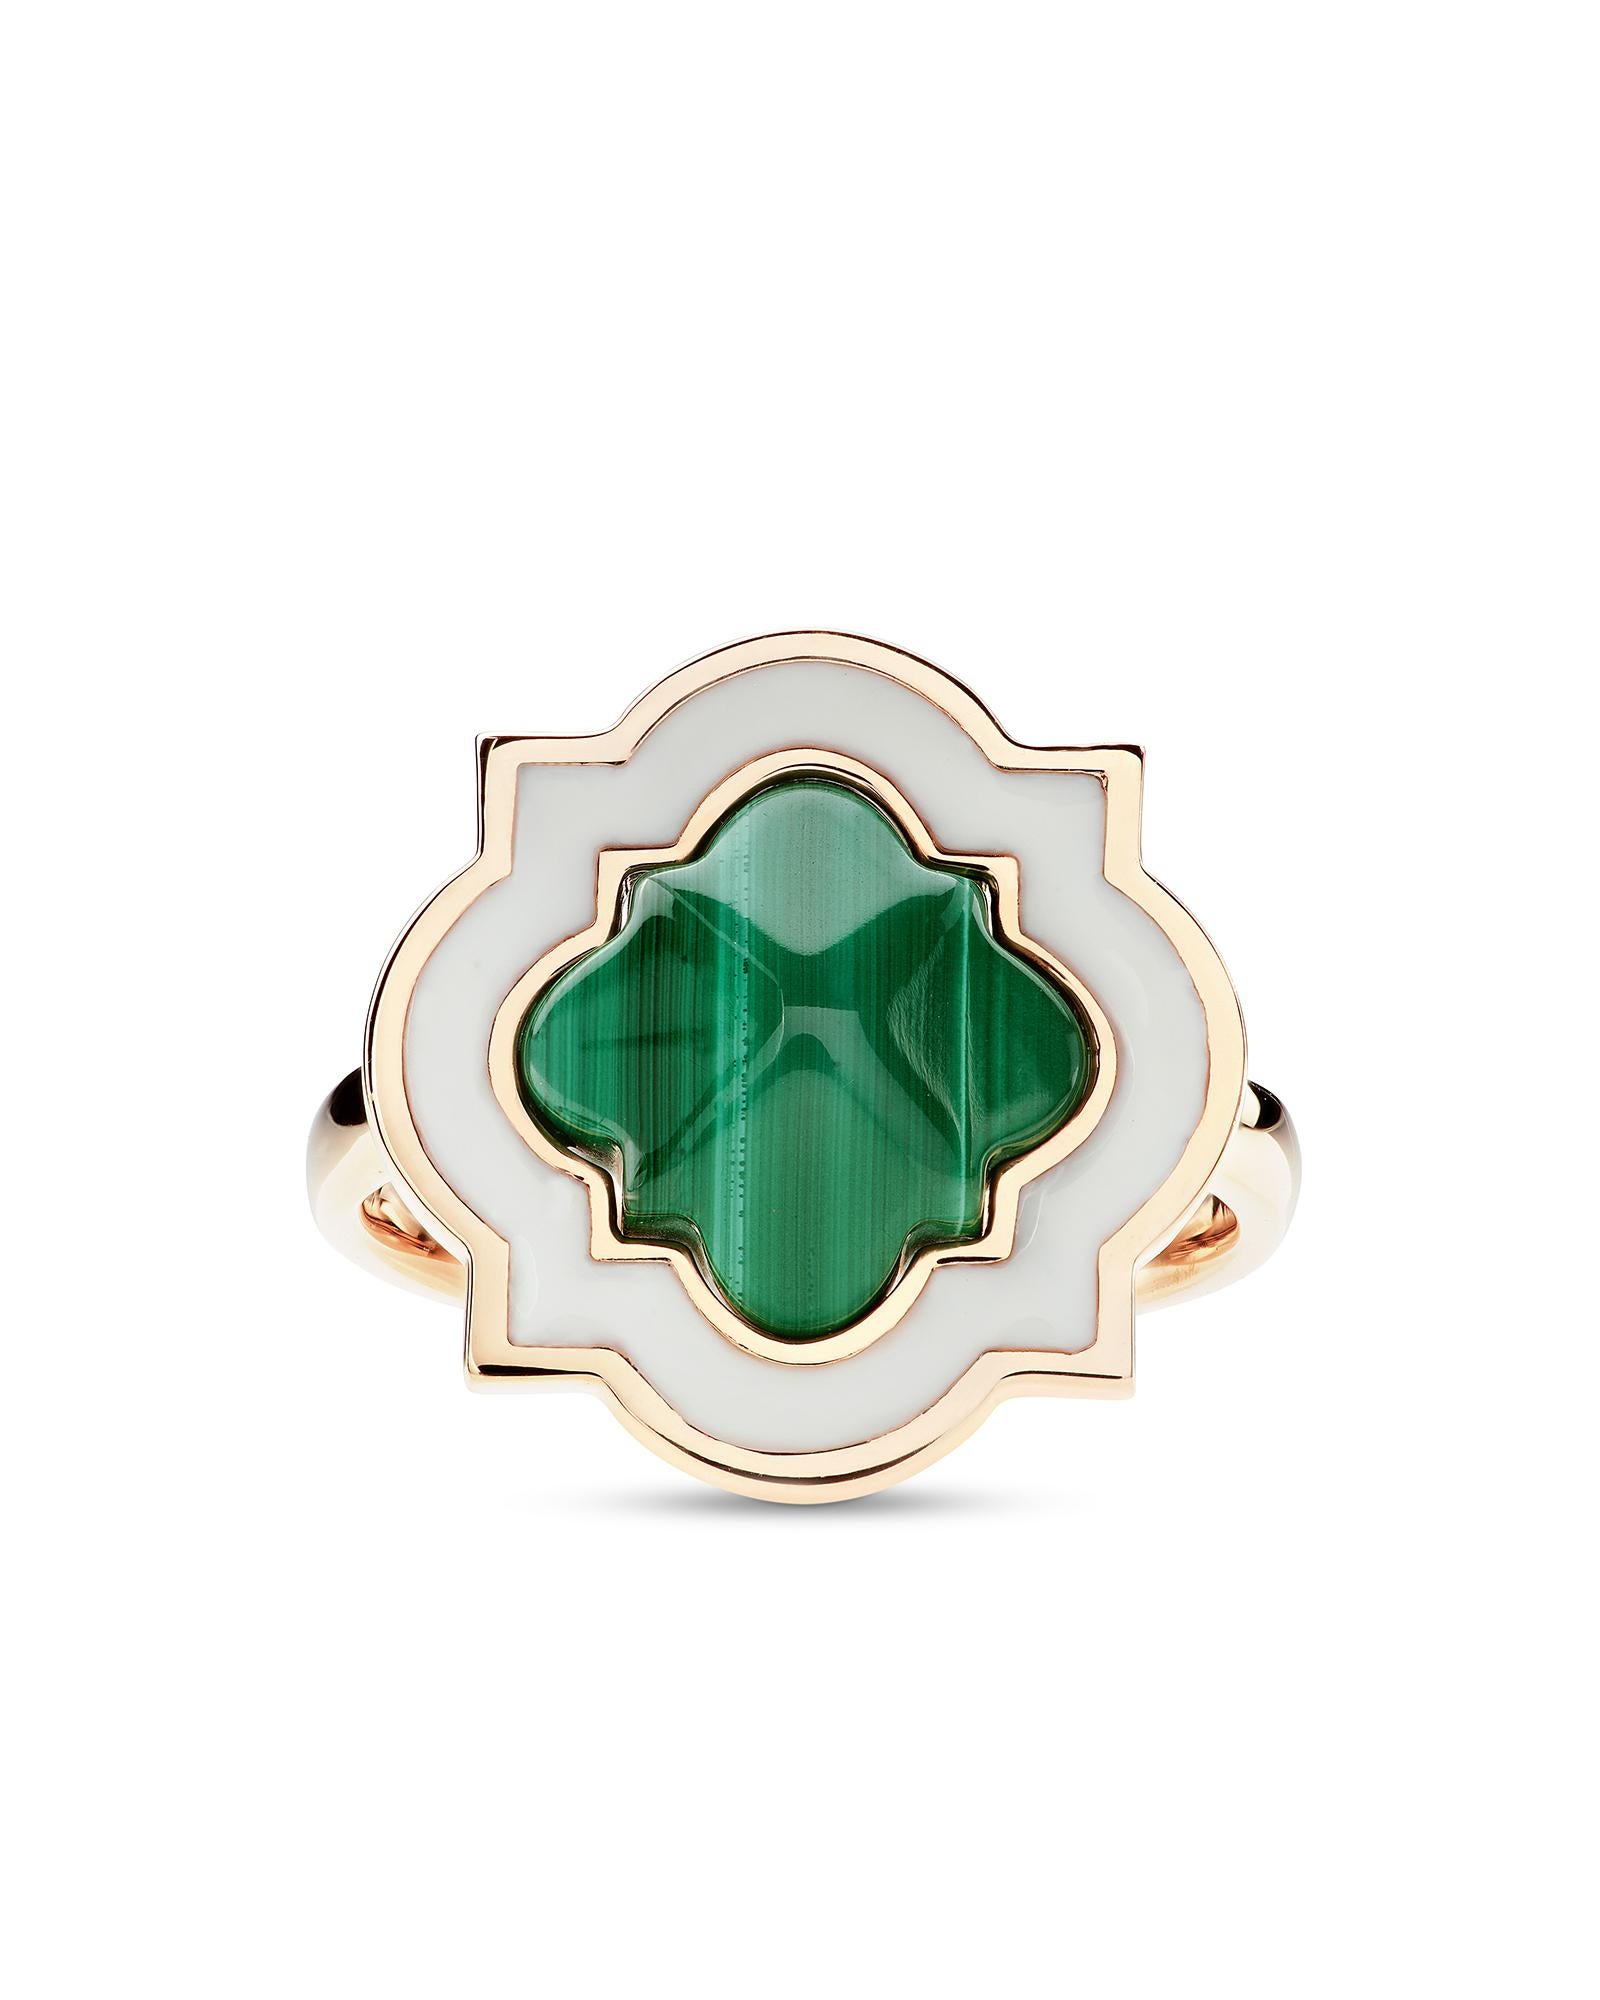 This ring with an iconic design is characterized by a bold aesthetic that combines materials, colors and essential lines. The geometeric lines reveal a fluid and sinuous trait and are animated by the intense light of the white enamel and embellished